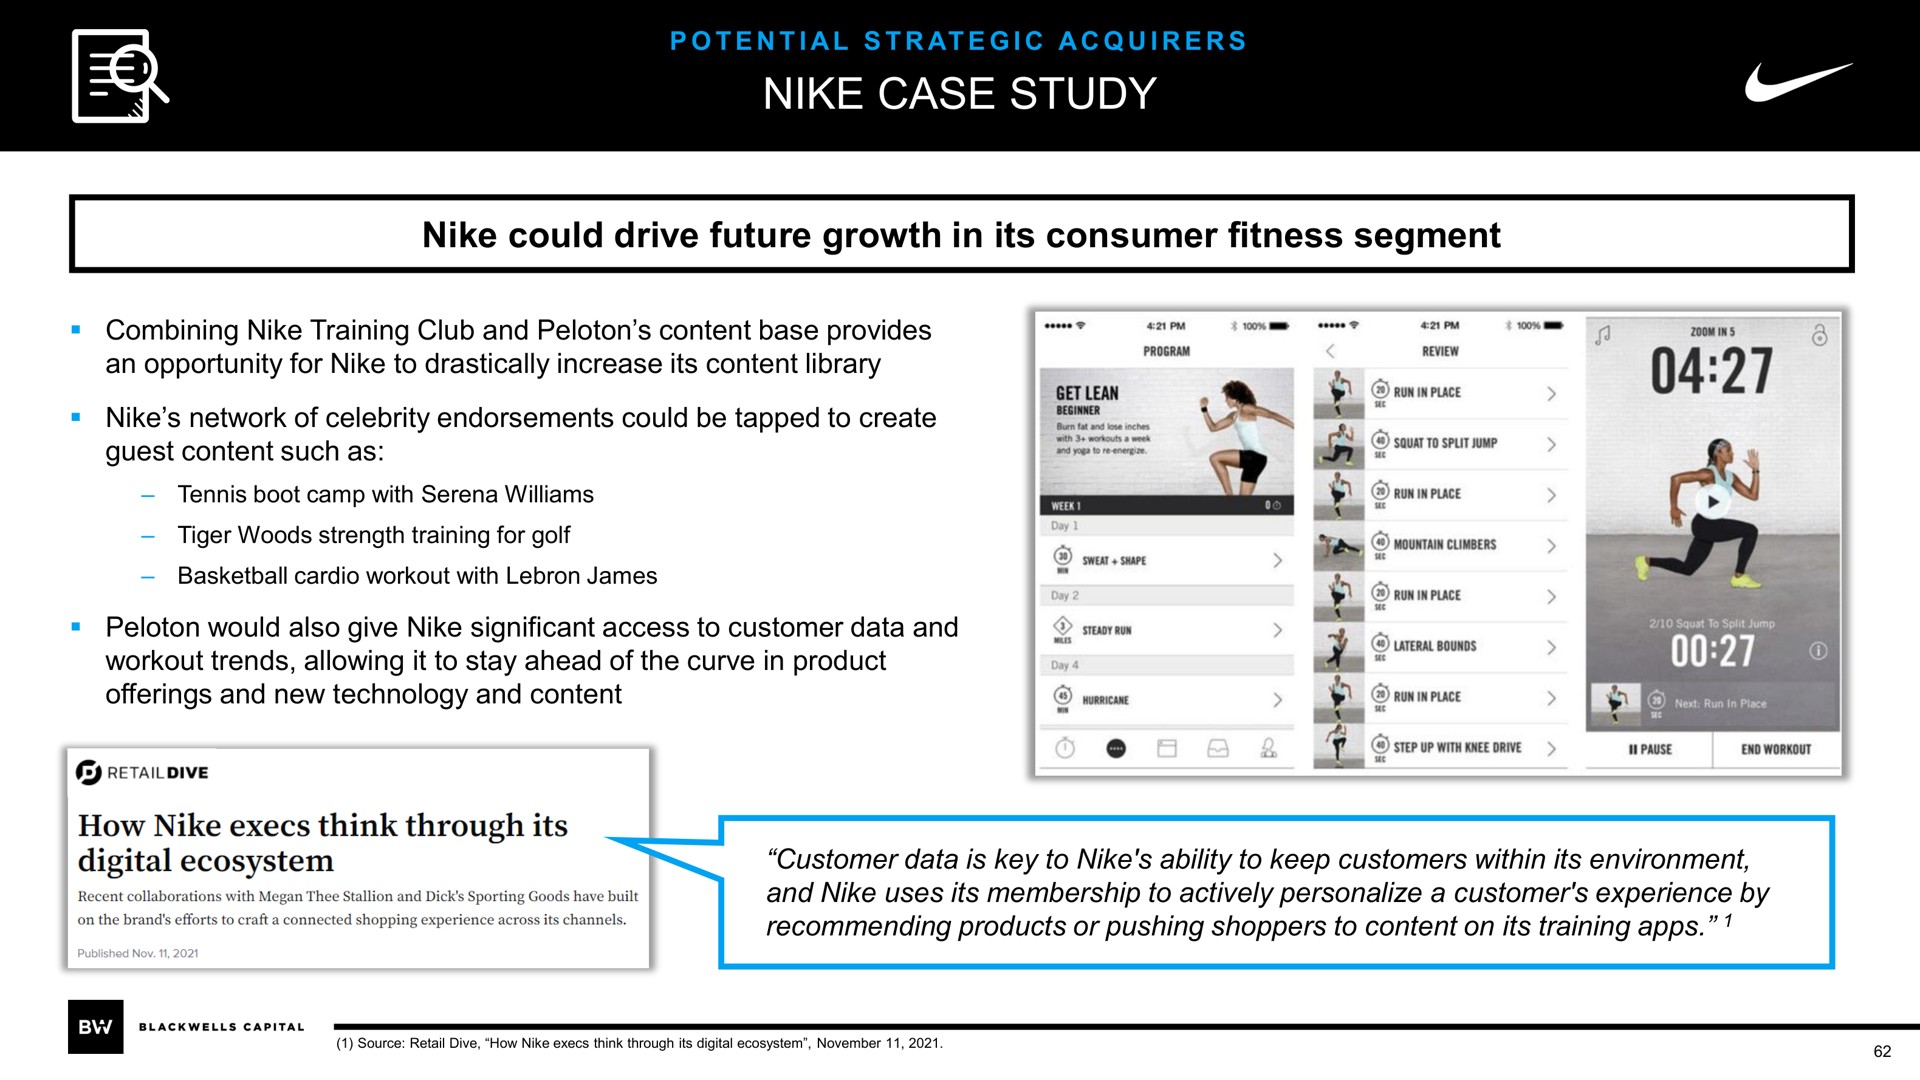 case study could drive future growth in its consumer fitness segment | Blackwells Capital